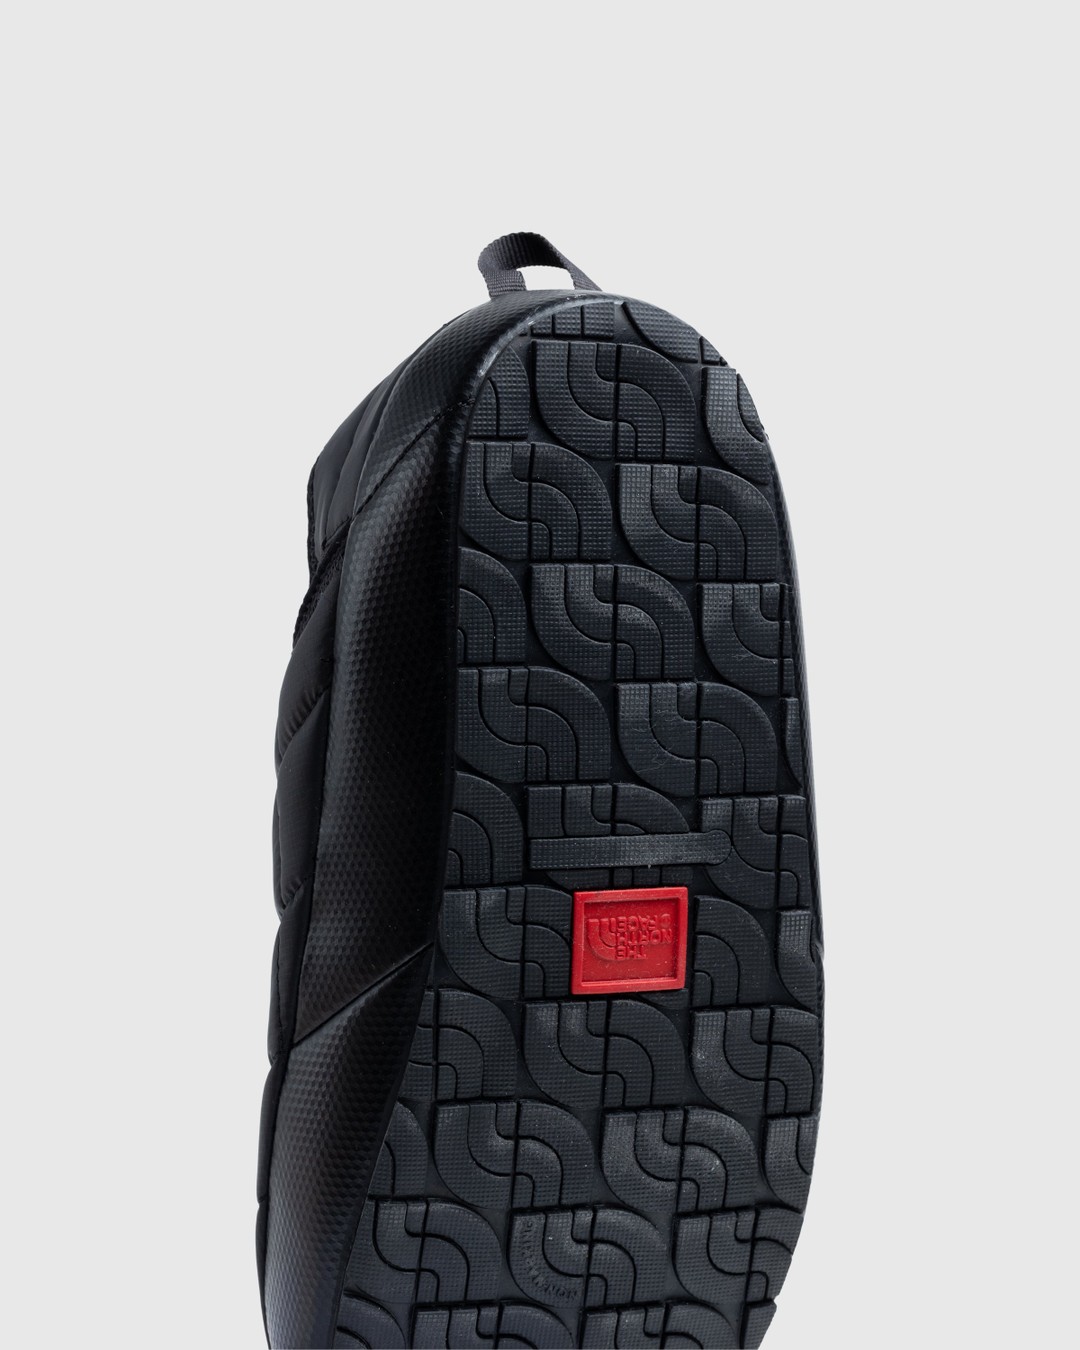 The North Face – ThermoBall Traction Mules V TNF Black/White - Sandals & Slides - Black - Image 6